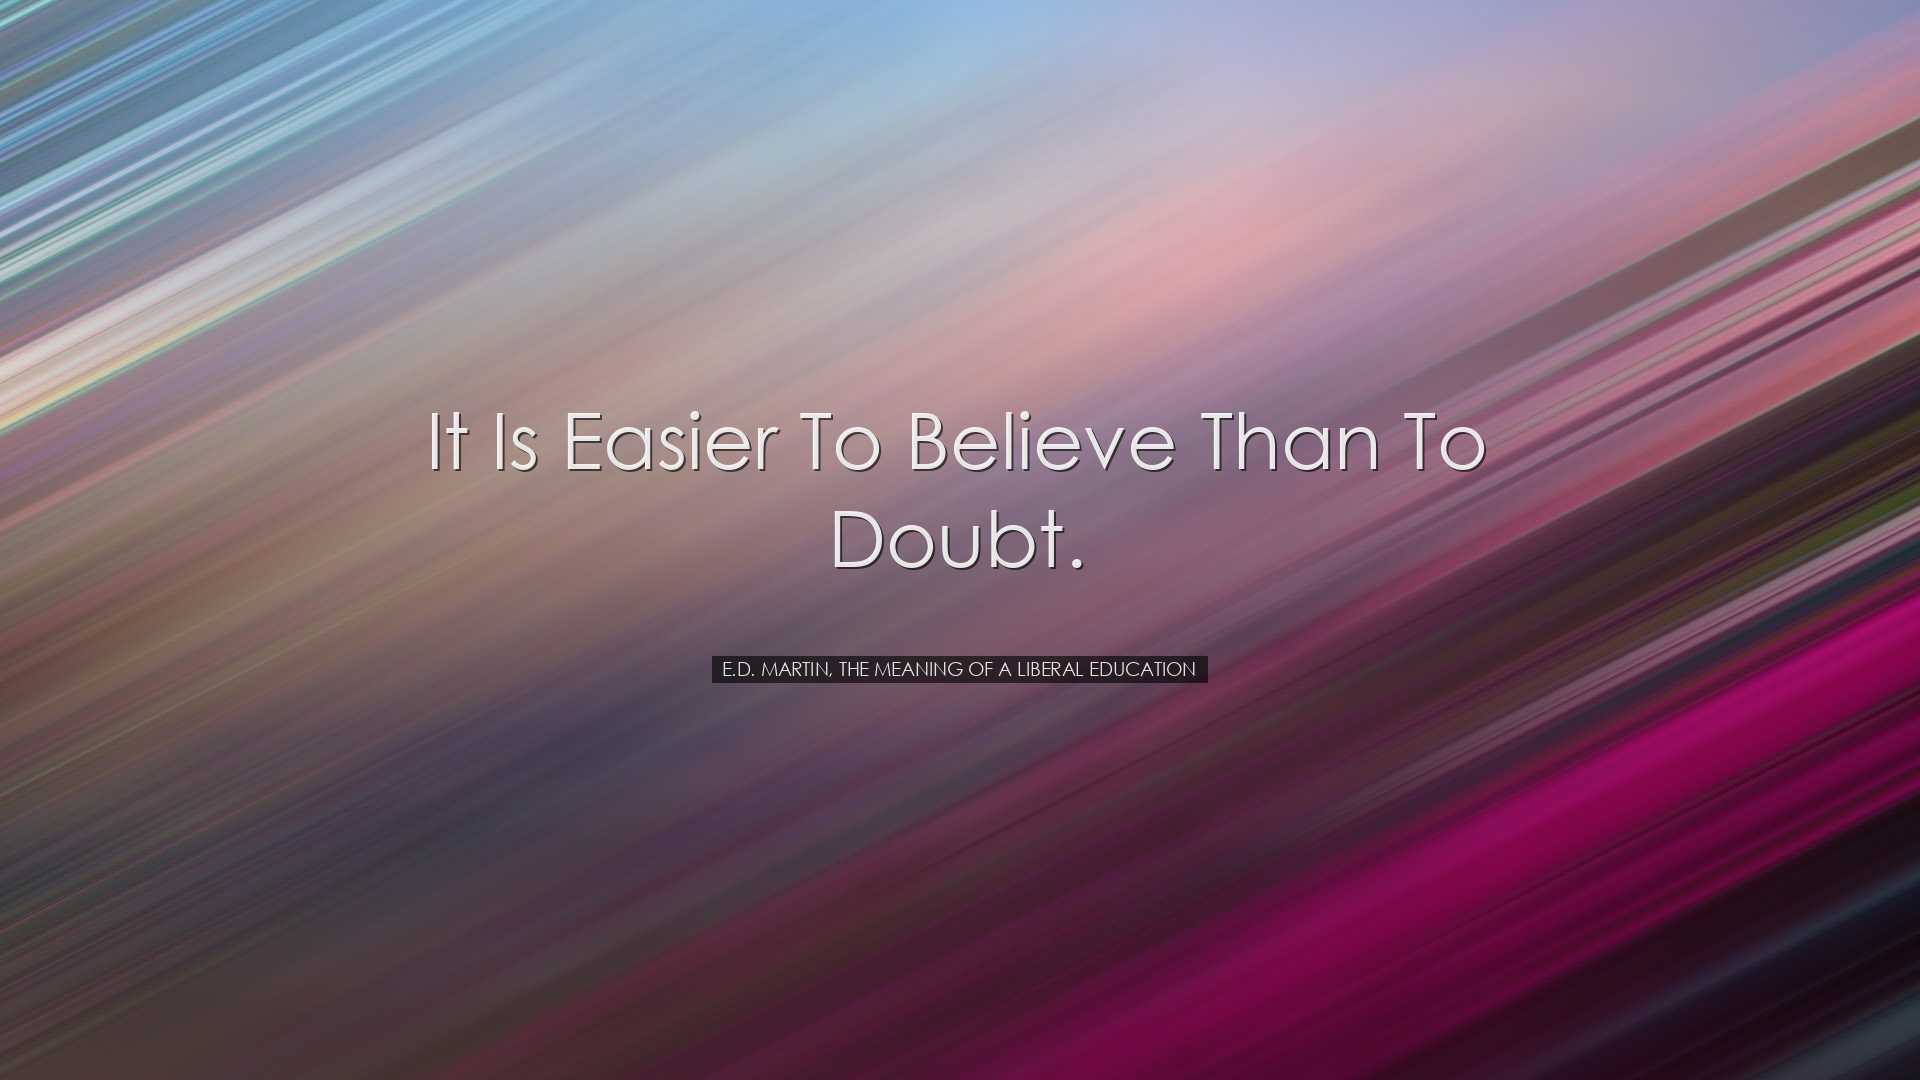 It is easier to believe than to doubt. - E.D. Martin, The Meaning